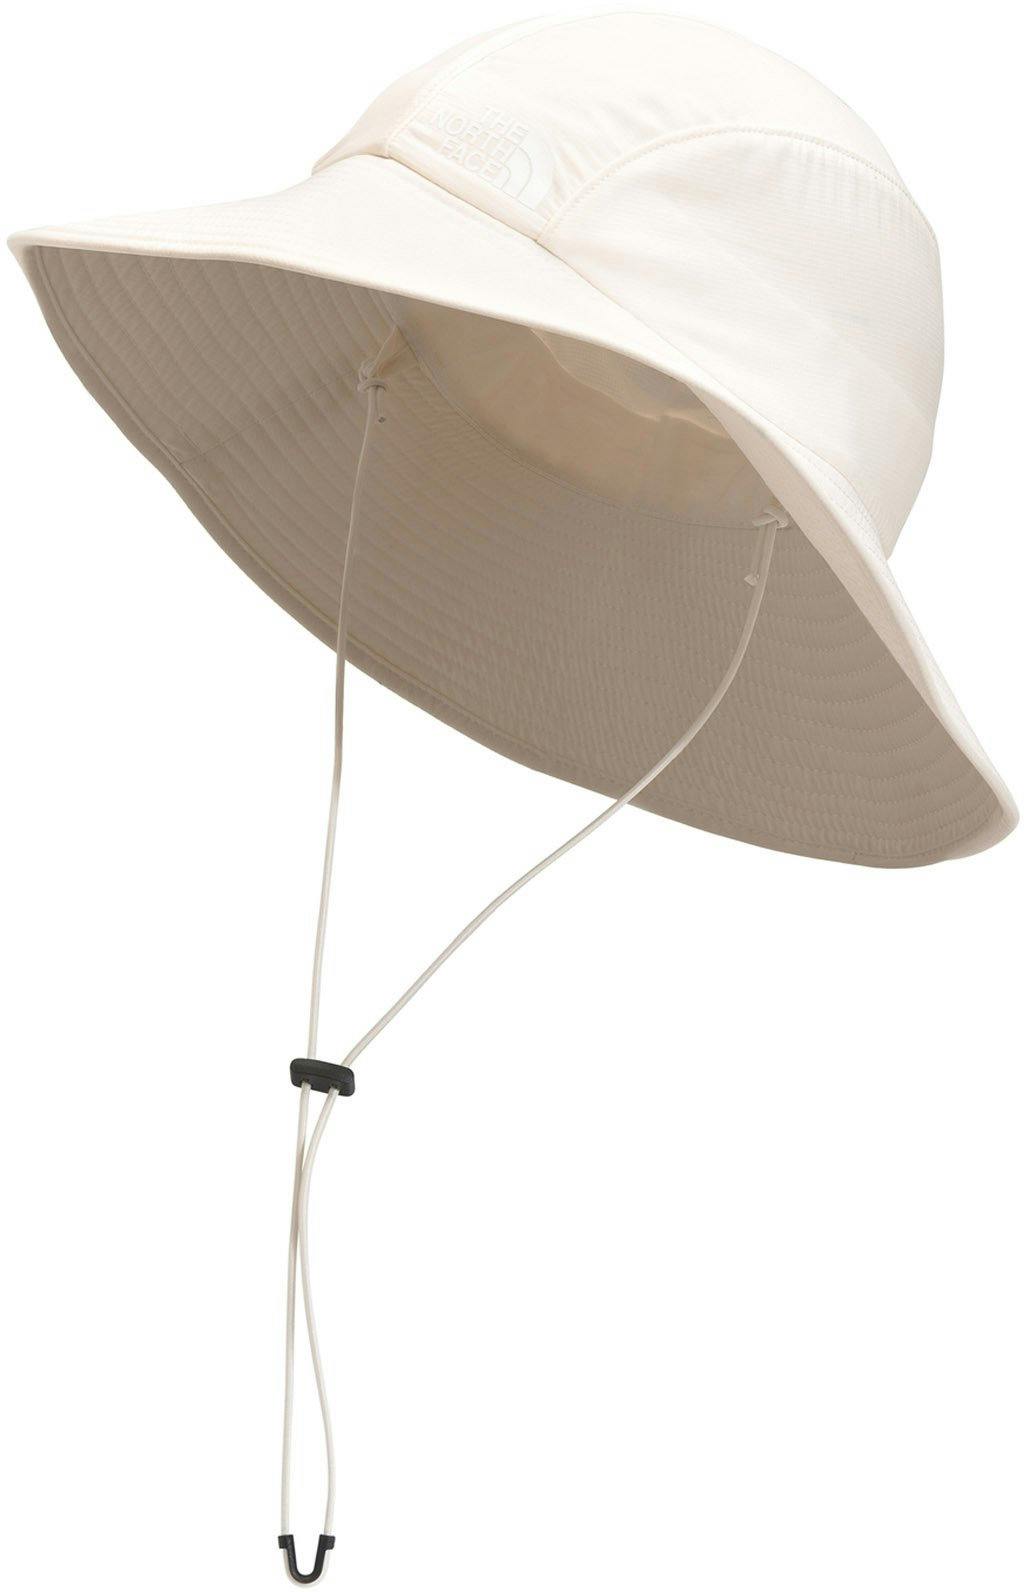 Product image for Horizon Breeze Brimmer Hat - Women's